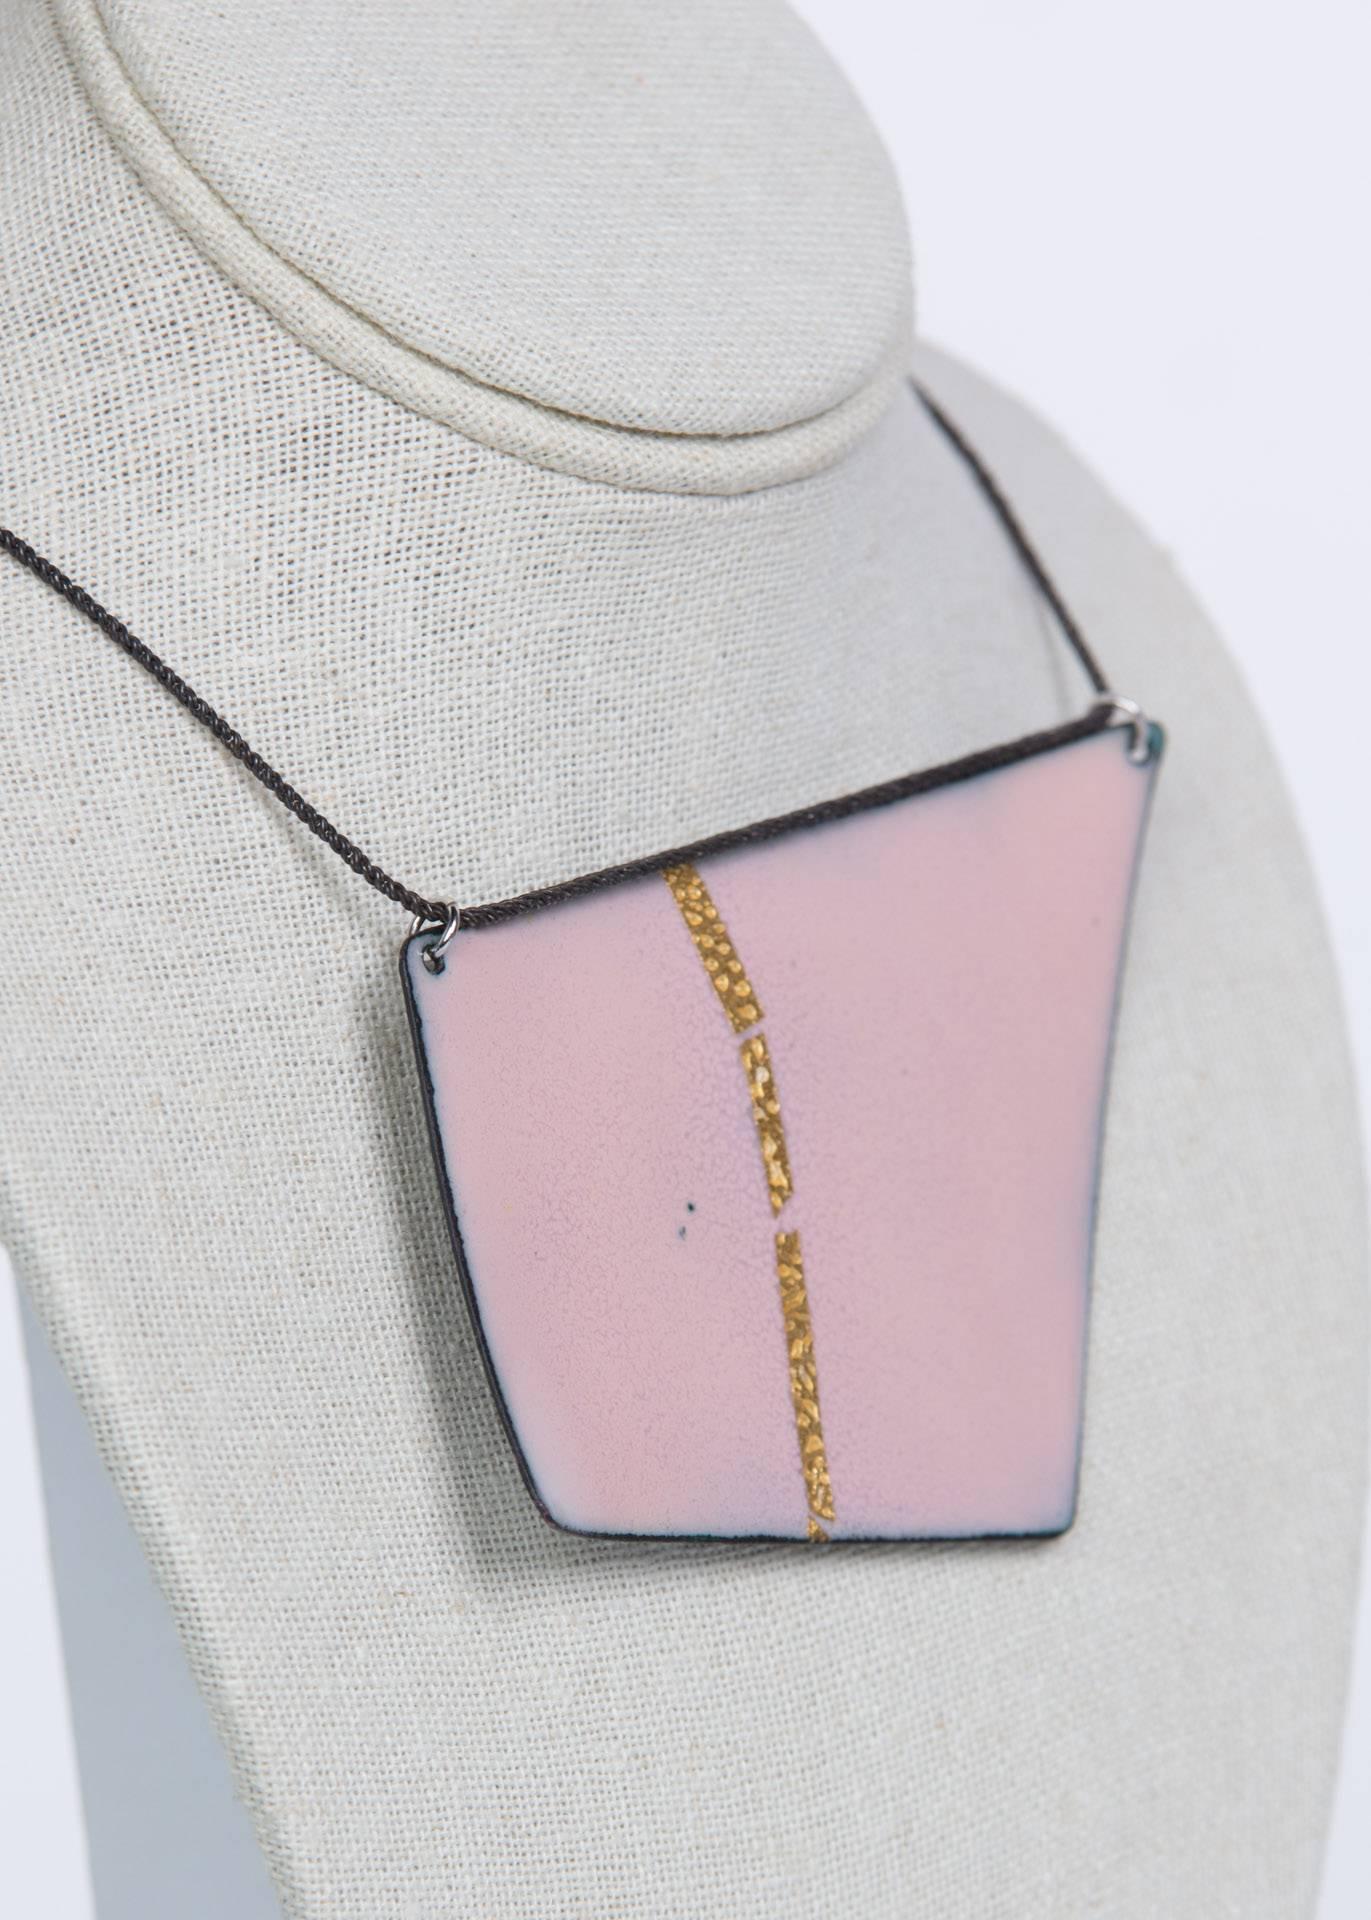 Modern Michel McNabb for Basha Gold Reversible Blue and Pink Quadrilateral Necklace For Sale